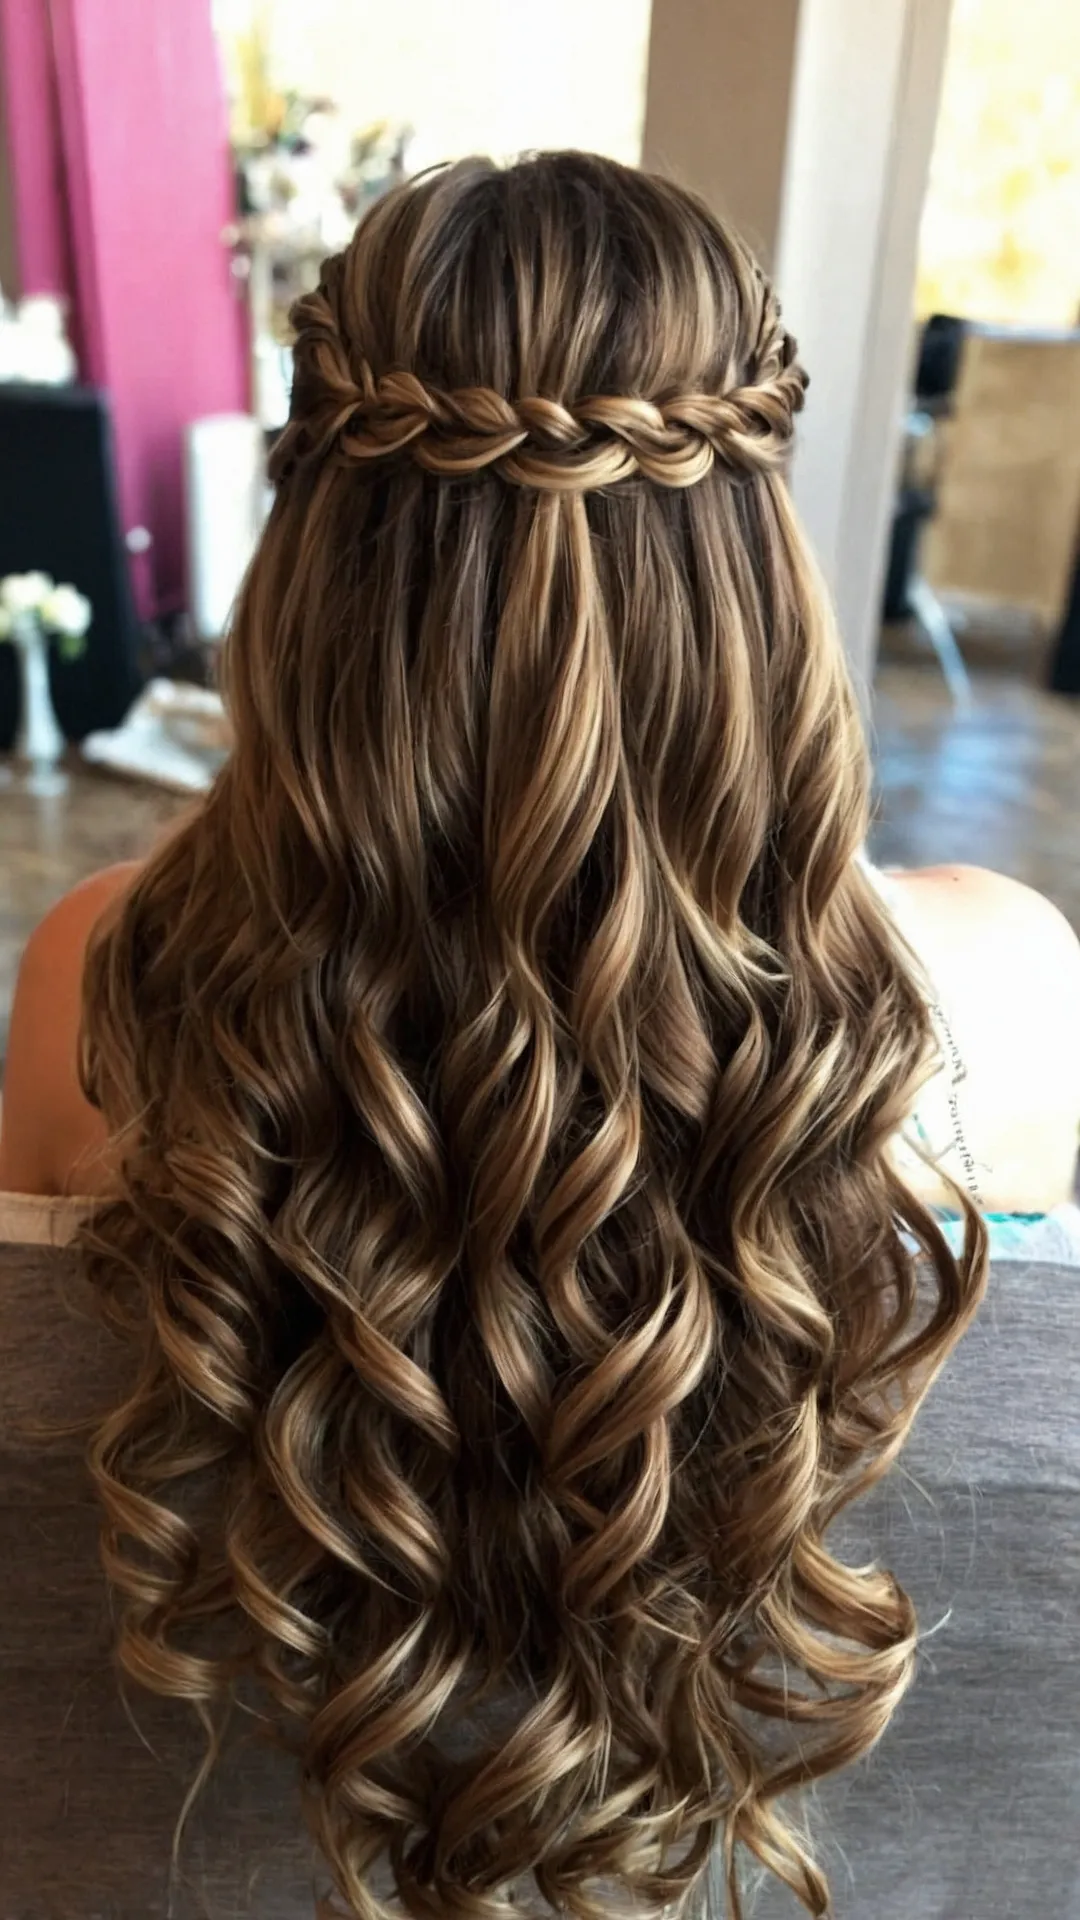 Dreamy Tresses: Long Hair Prom Hairstyle Inspiration